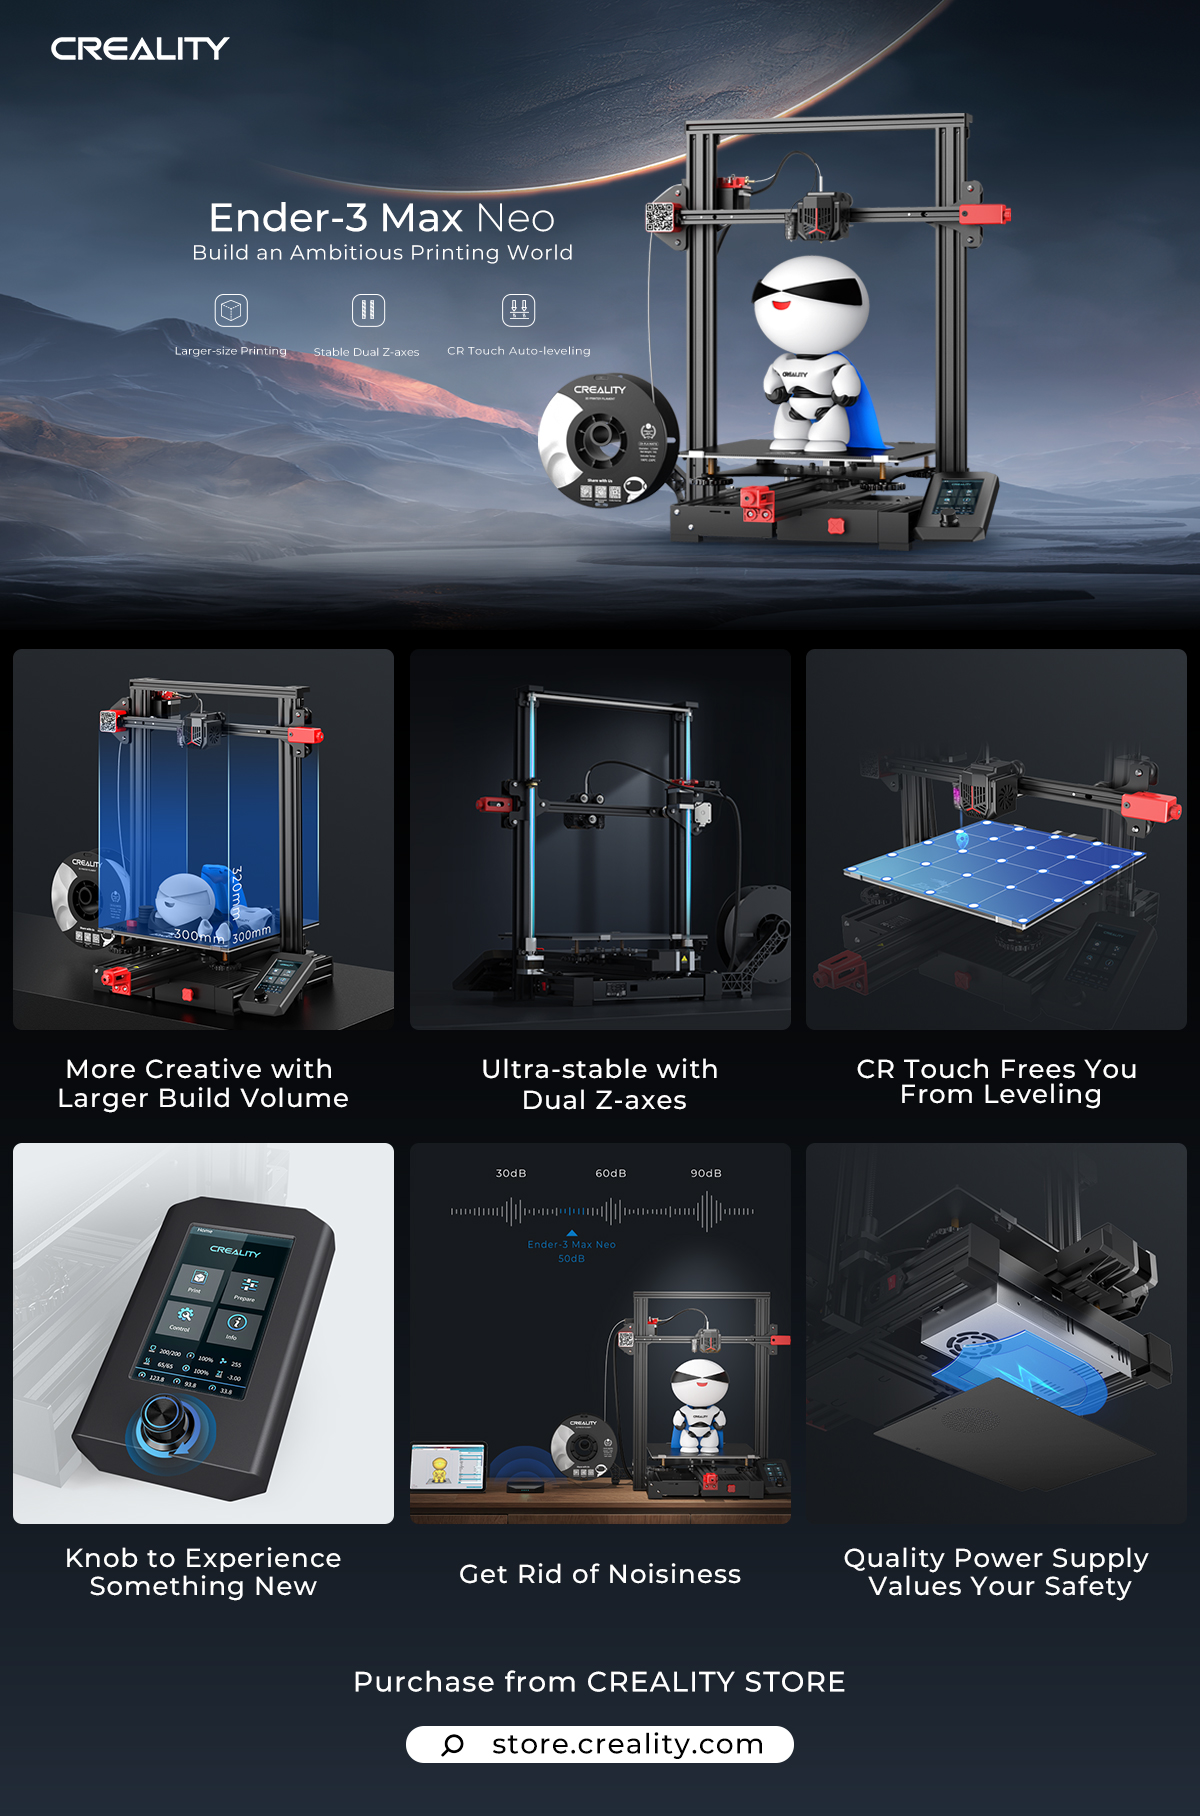 Ender 3 Neo | Ender-3 Neo, Ender-3 V2 Neo, and Ender-3 Max Neo, which is the right one for you?